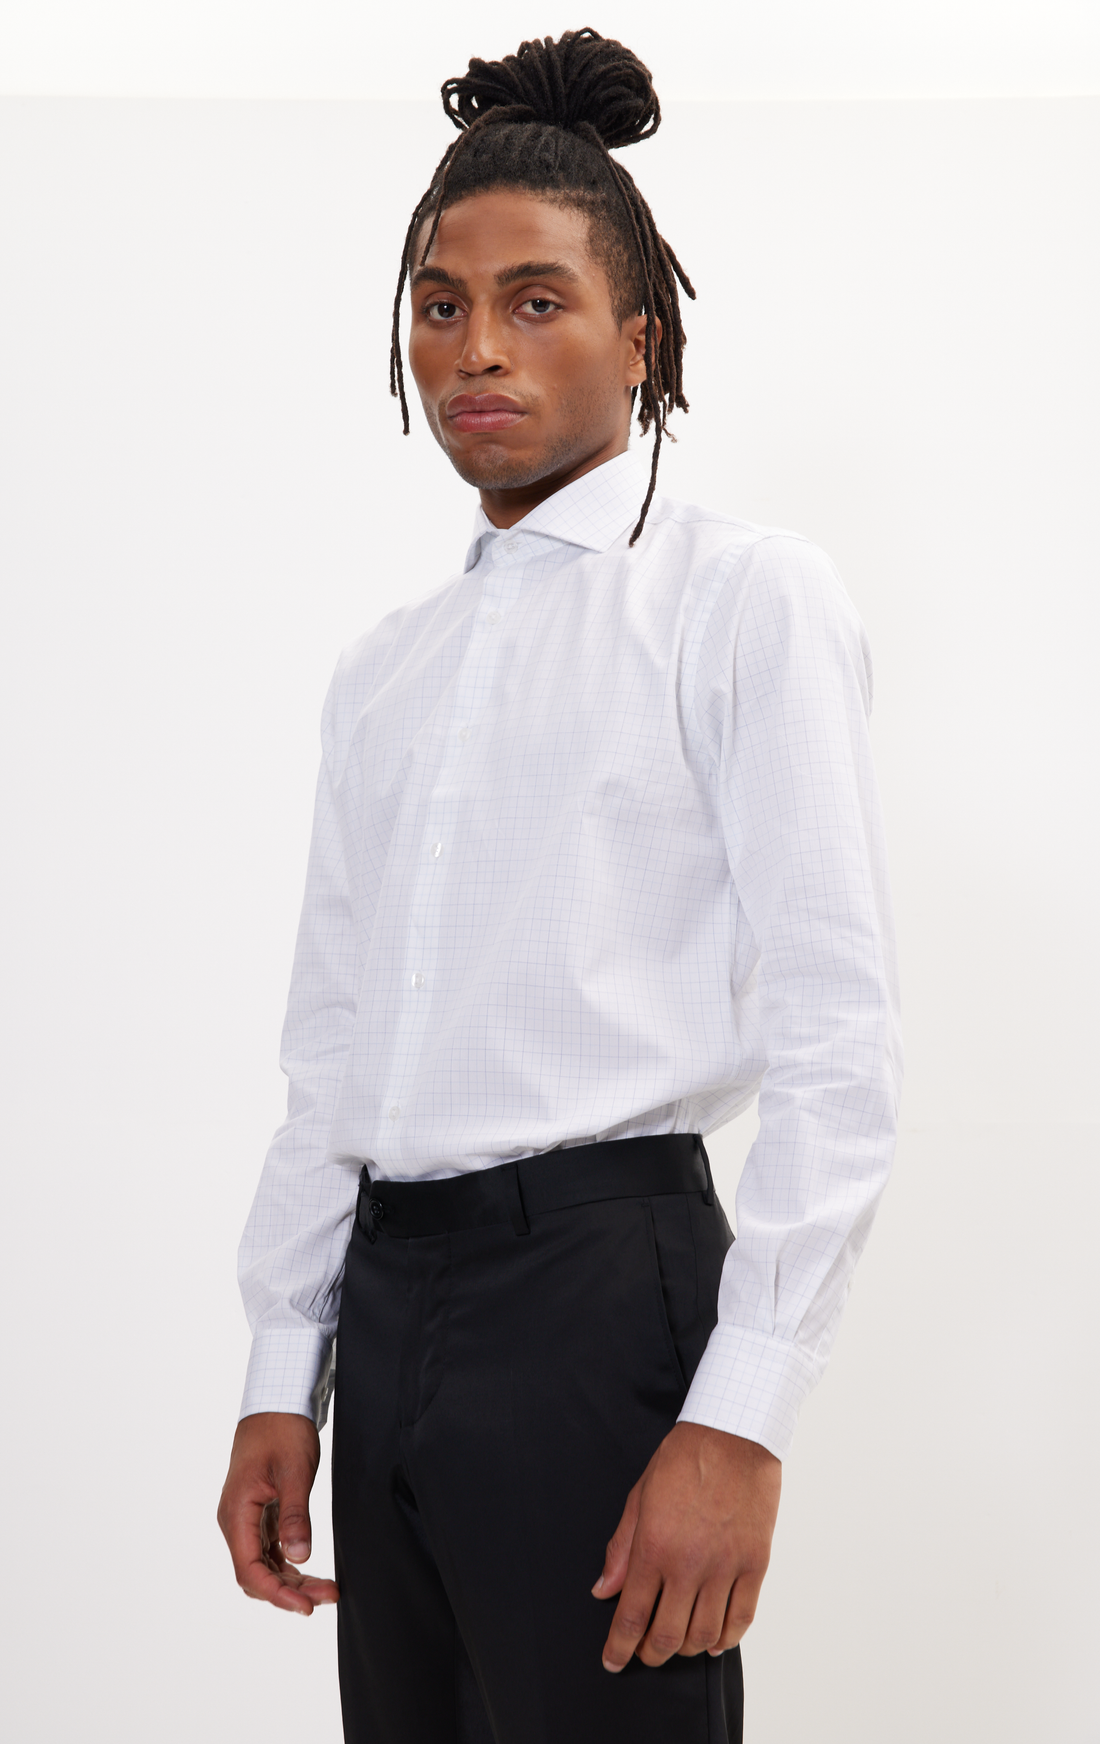 N° AN4903 PURE COTTON FRENCH PLACKET SPREAD COLLAR DRESS SHIRT - WHITE GRAPH